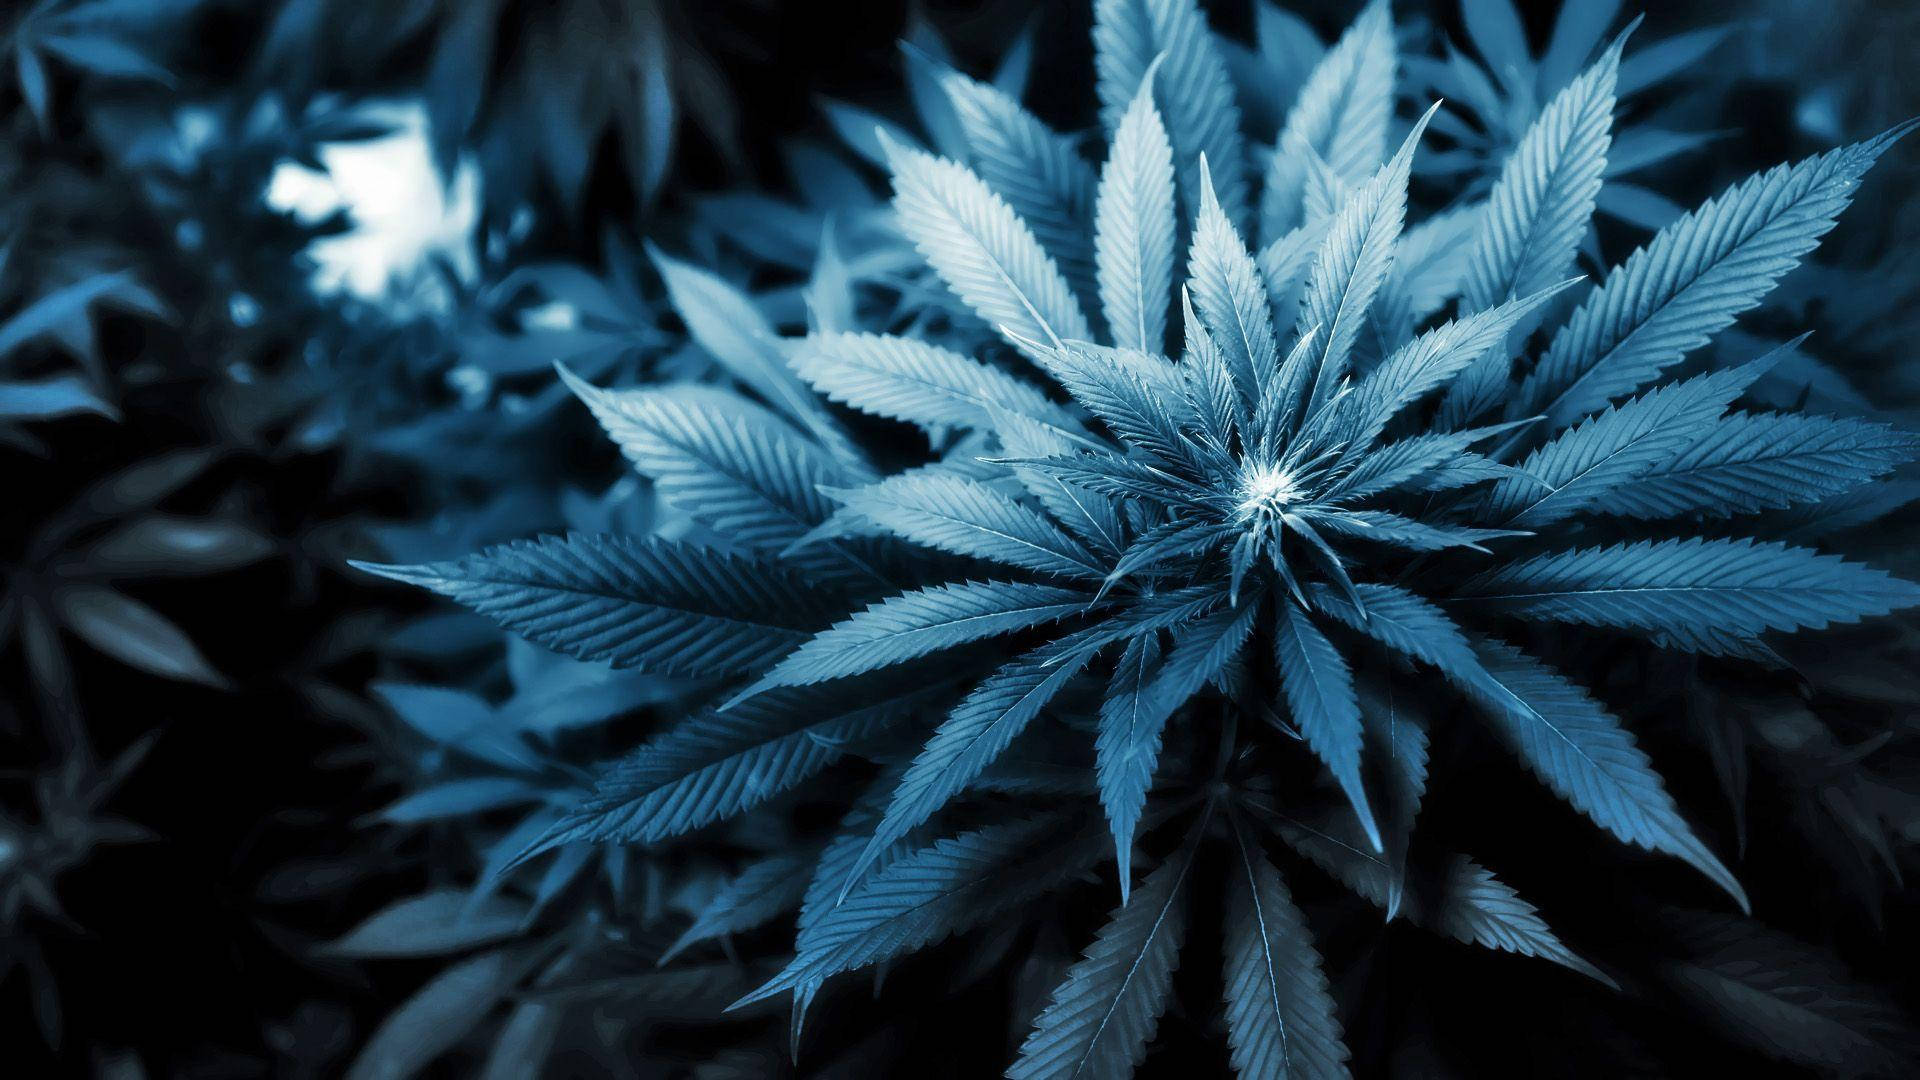 Weed Wallpaper - Apps on Google Play